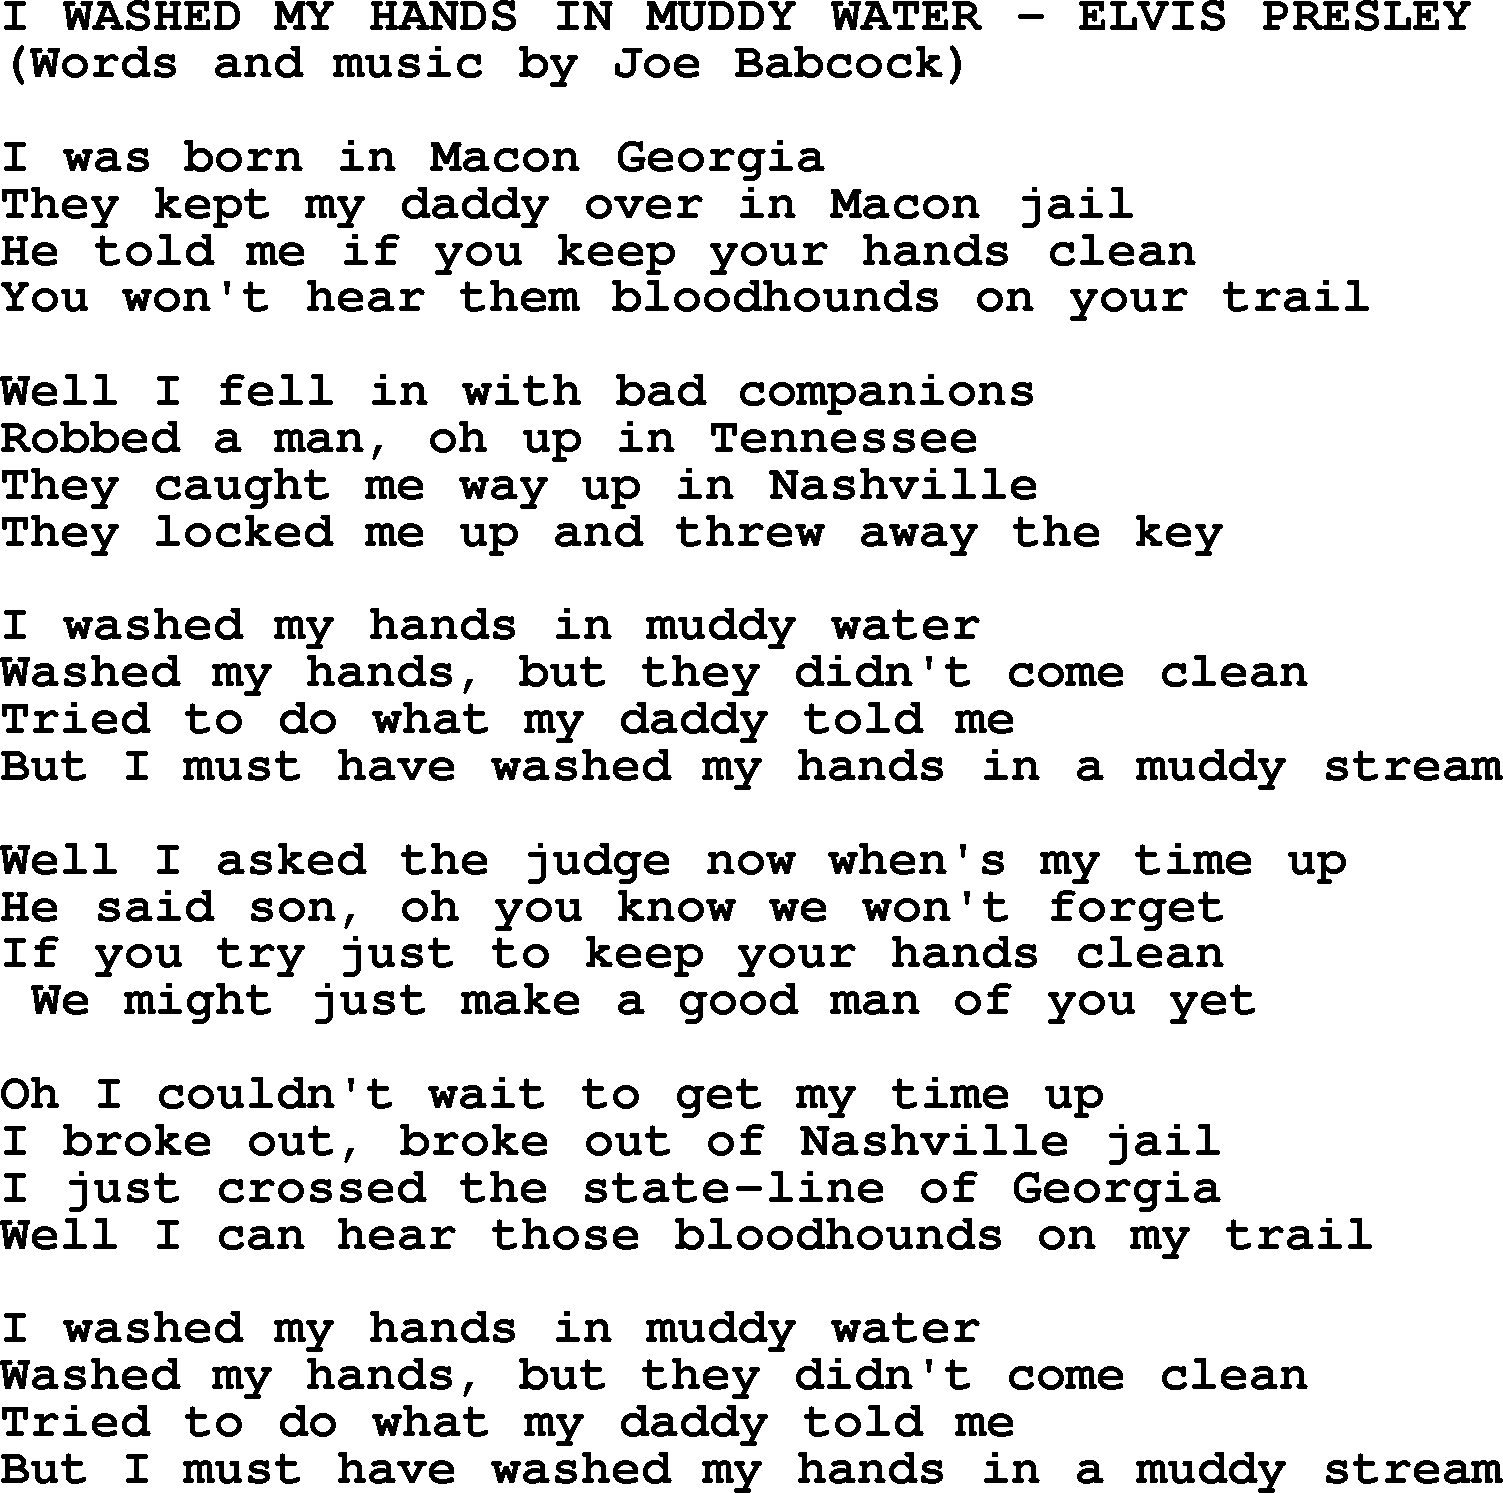 Elvis Presley song: I Washed My Hands In Muddy Water lyrics